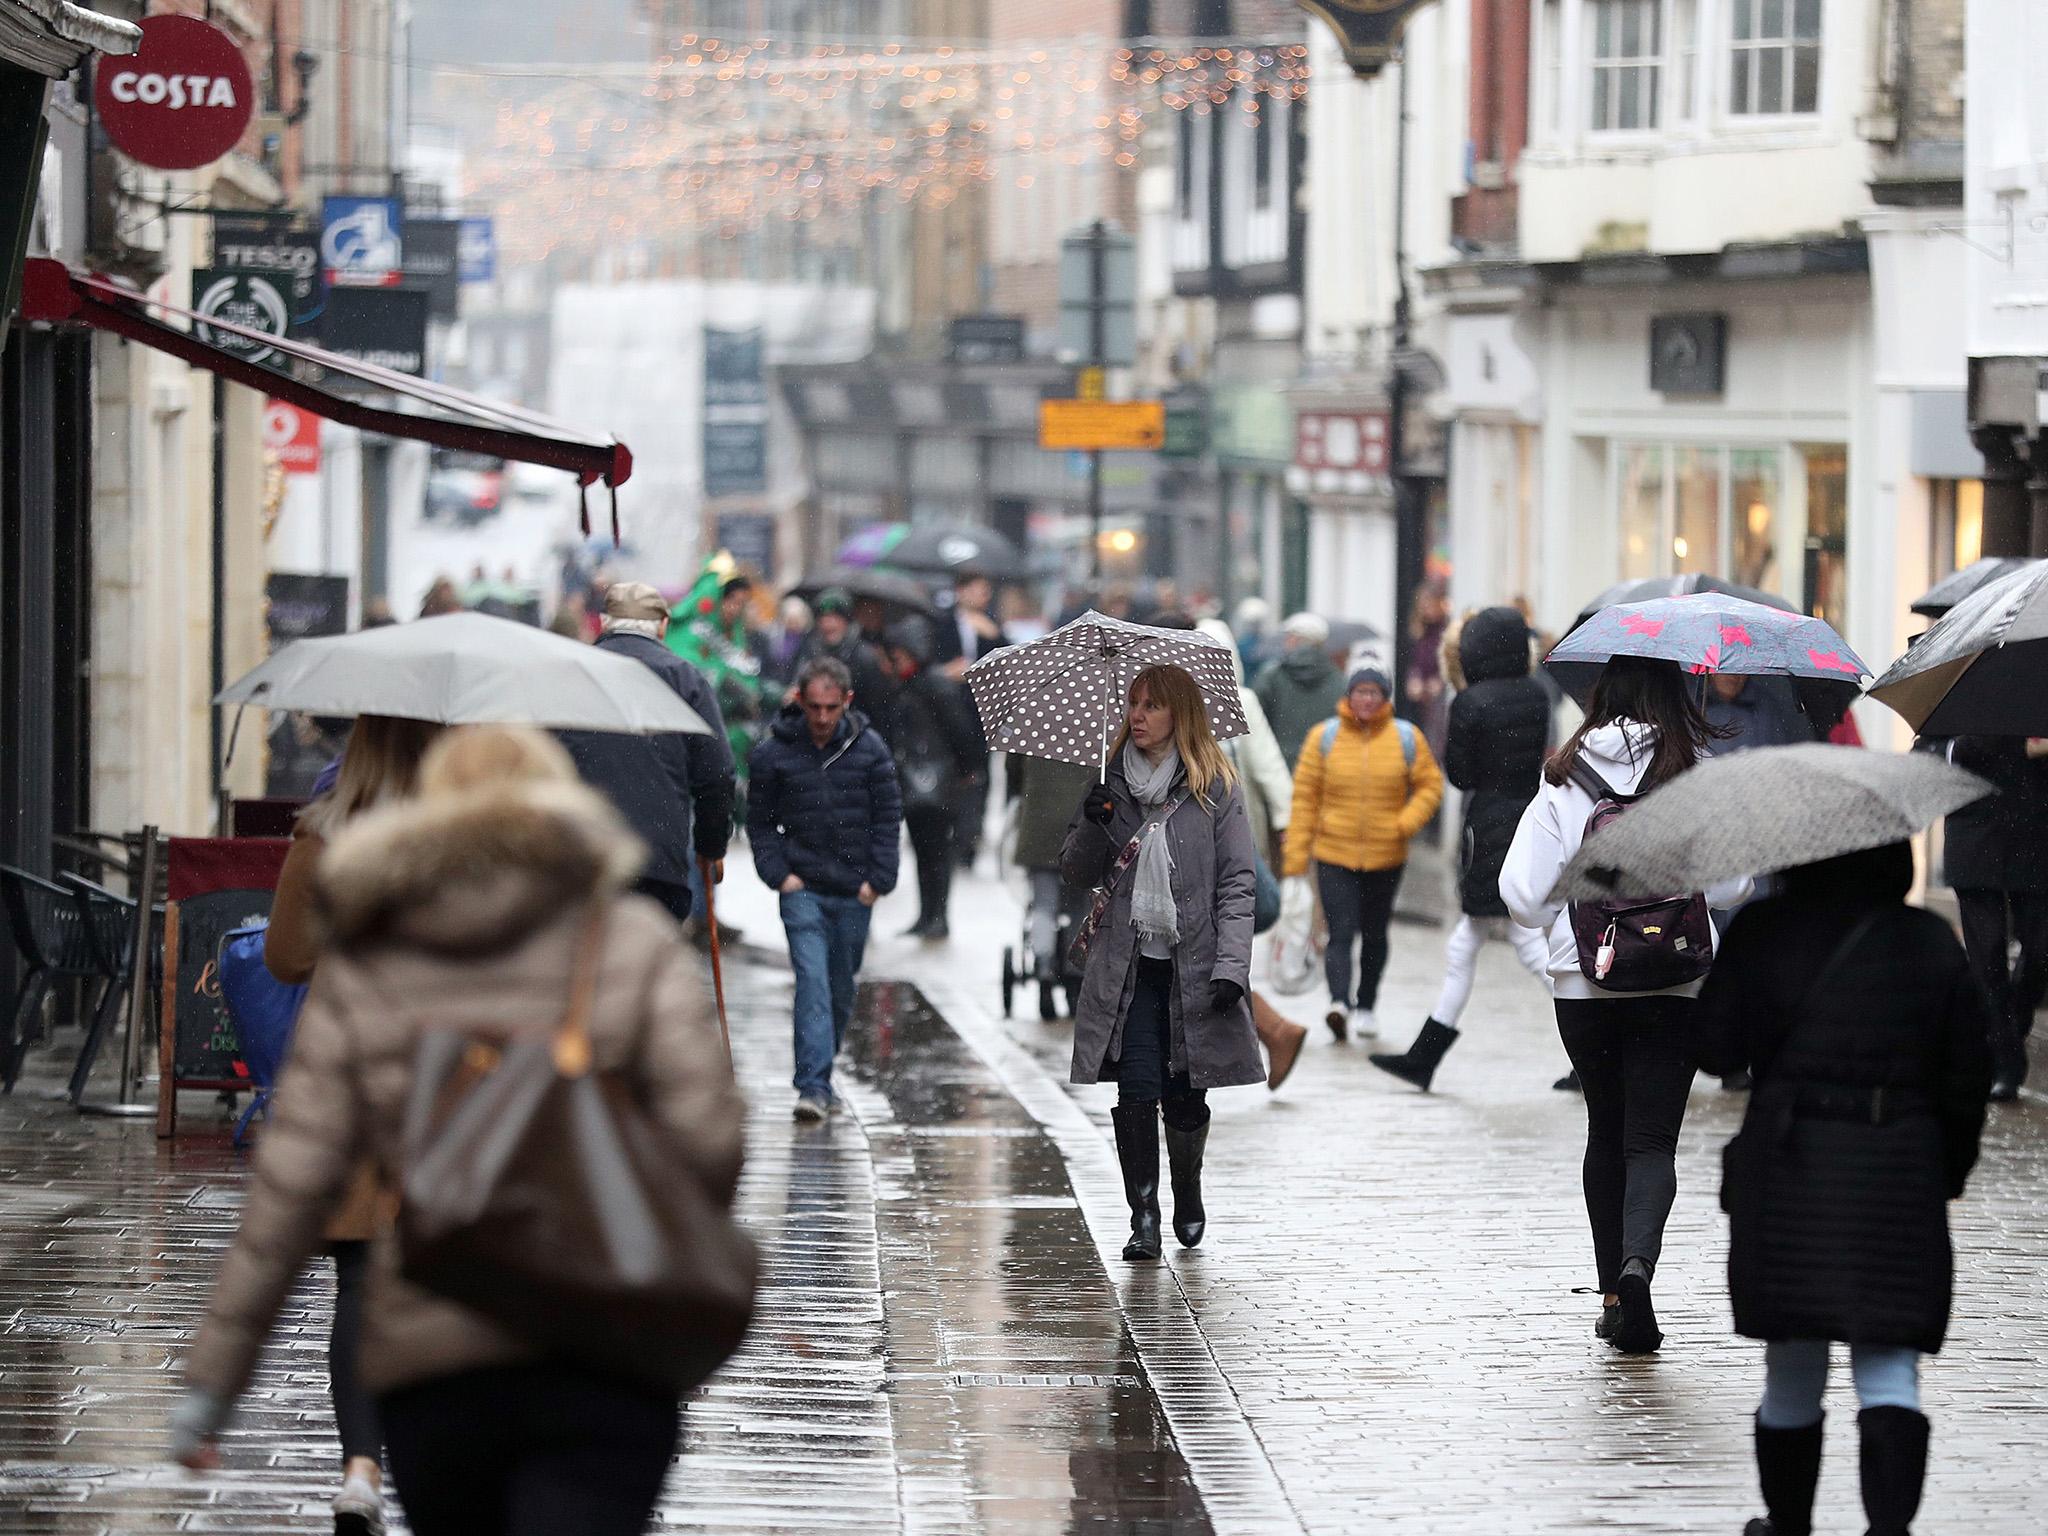 September’s fall is partly down to wet weather